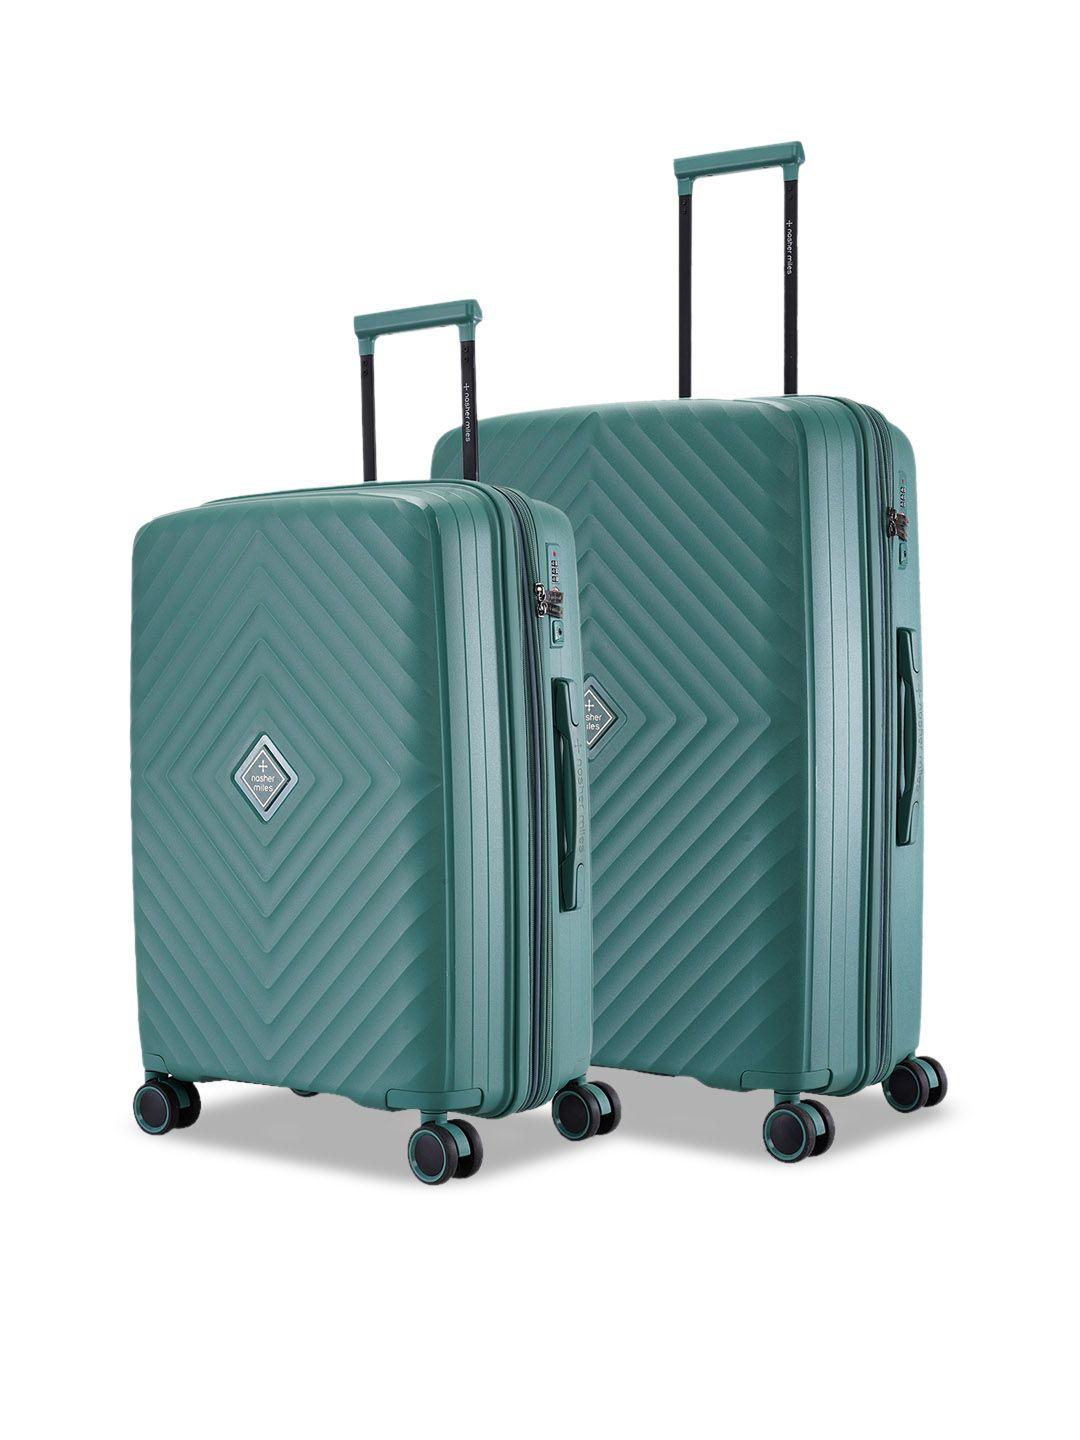 nasher miles set of 2 hard-sided trolley bags